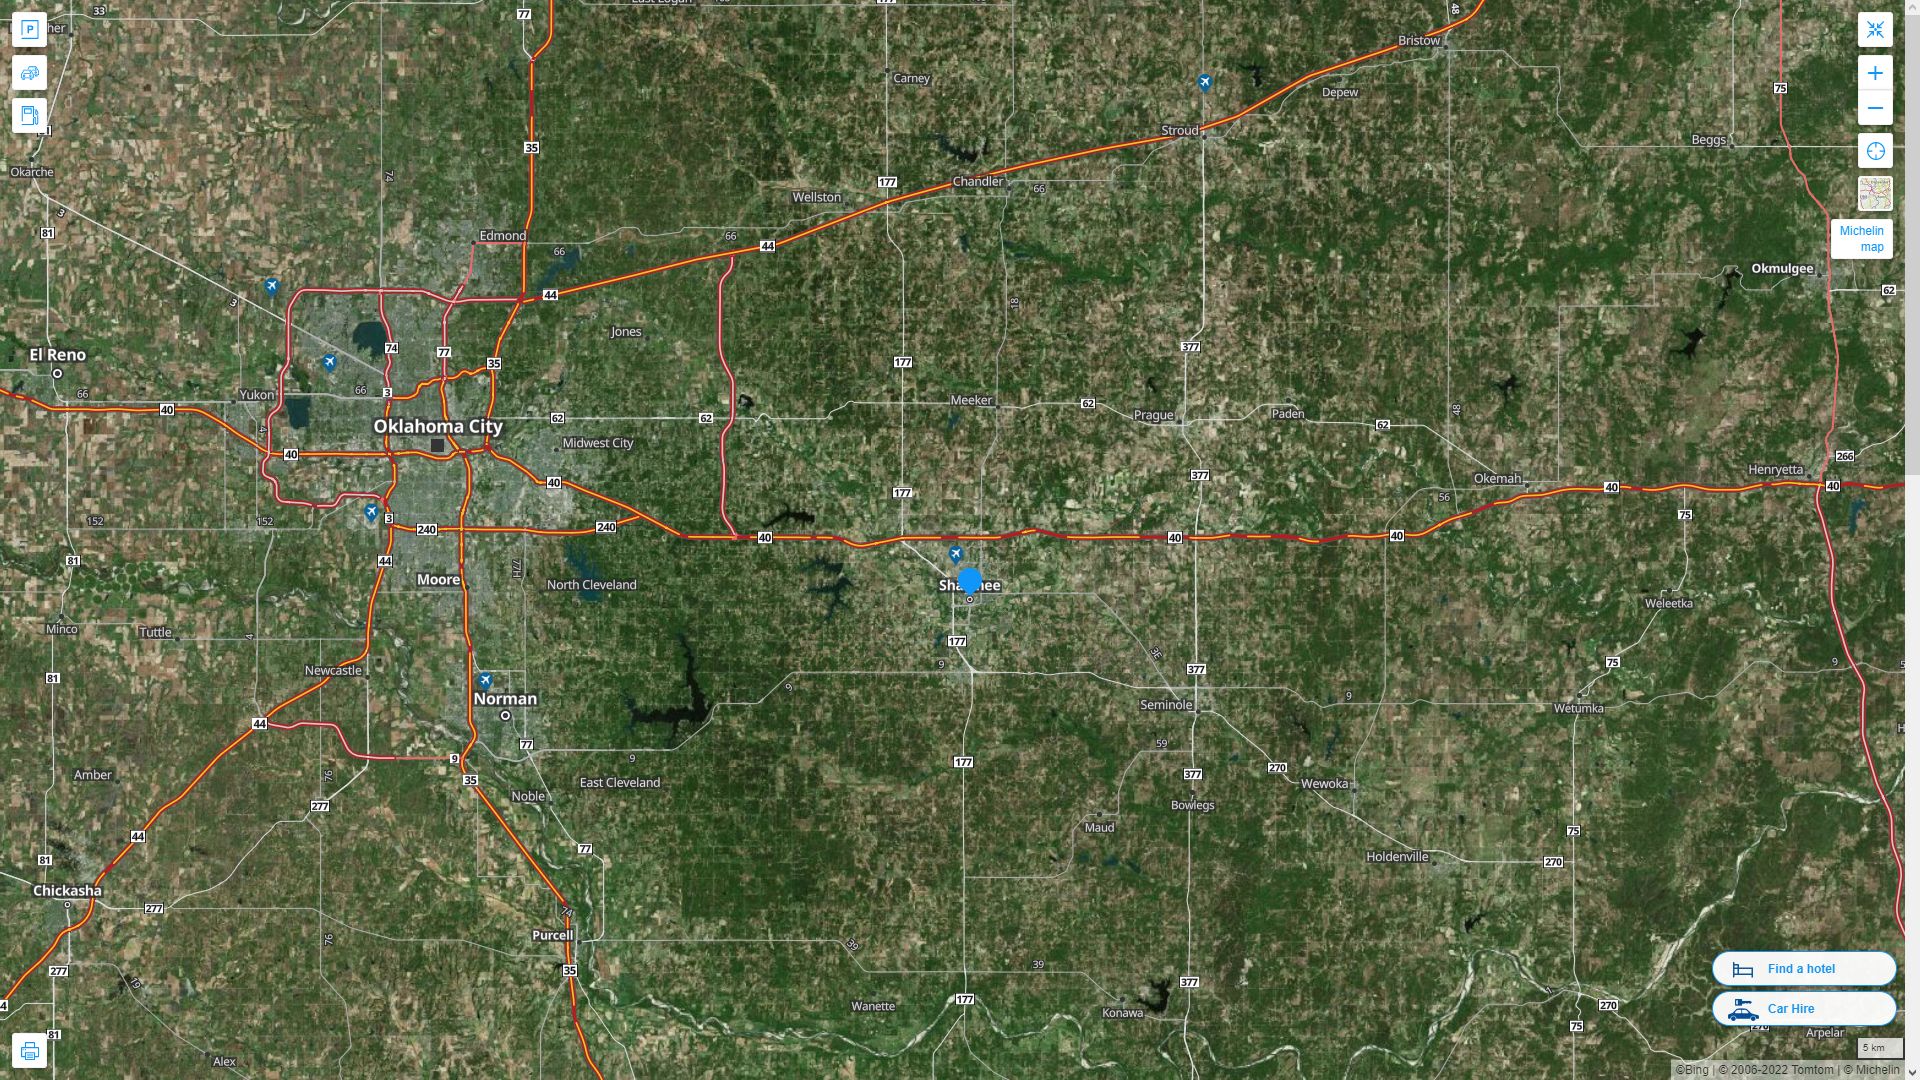 Shawnee Oklahoma Highway and Road Map with Satellite View